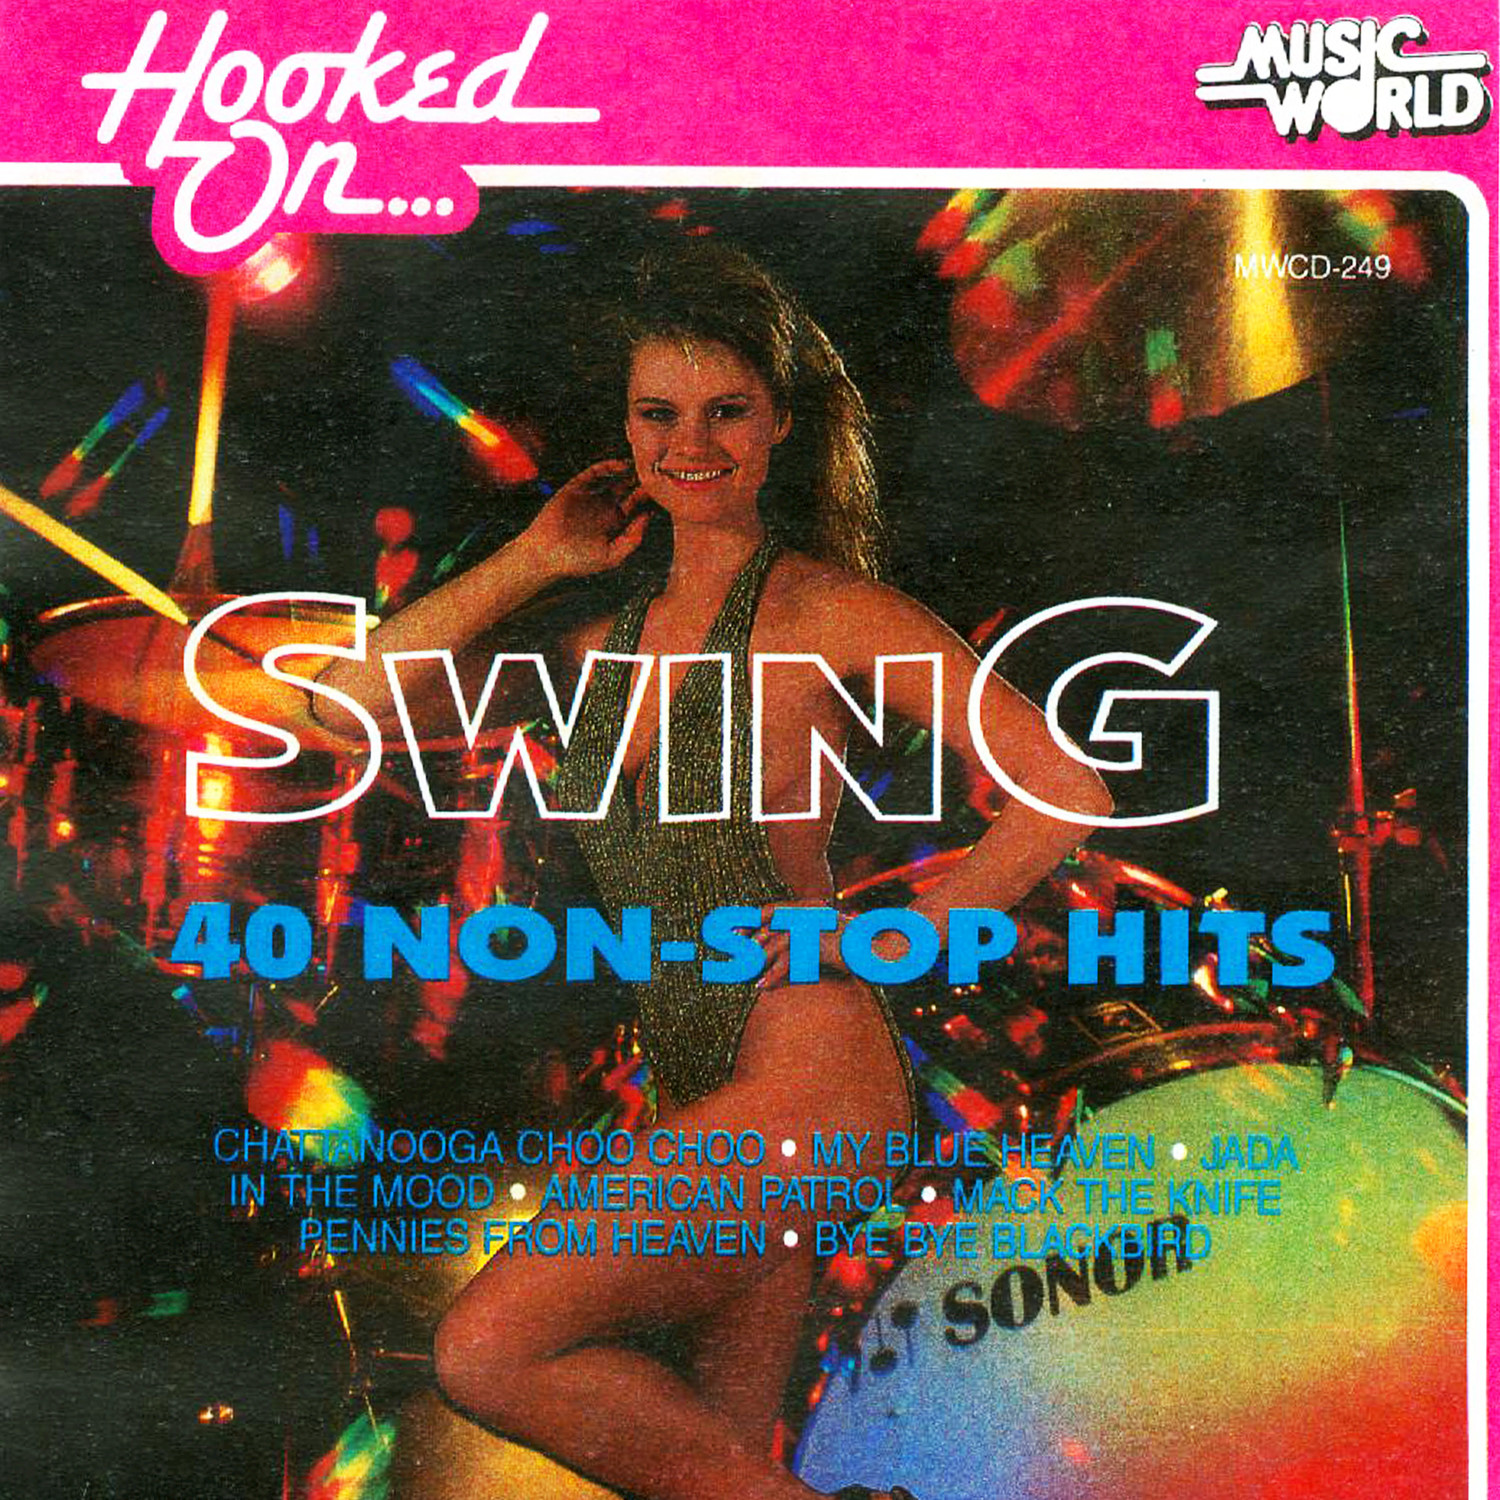 Hooked on Swing - 40 Non-Stop Hits